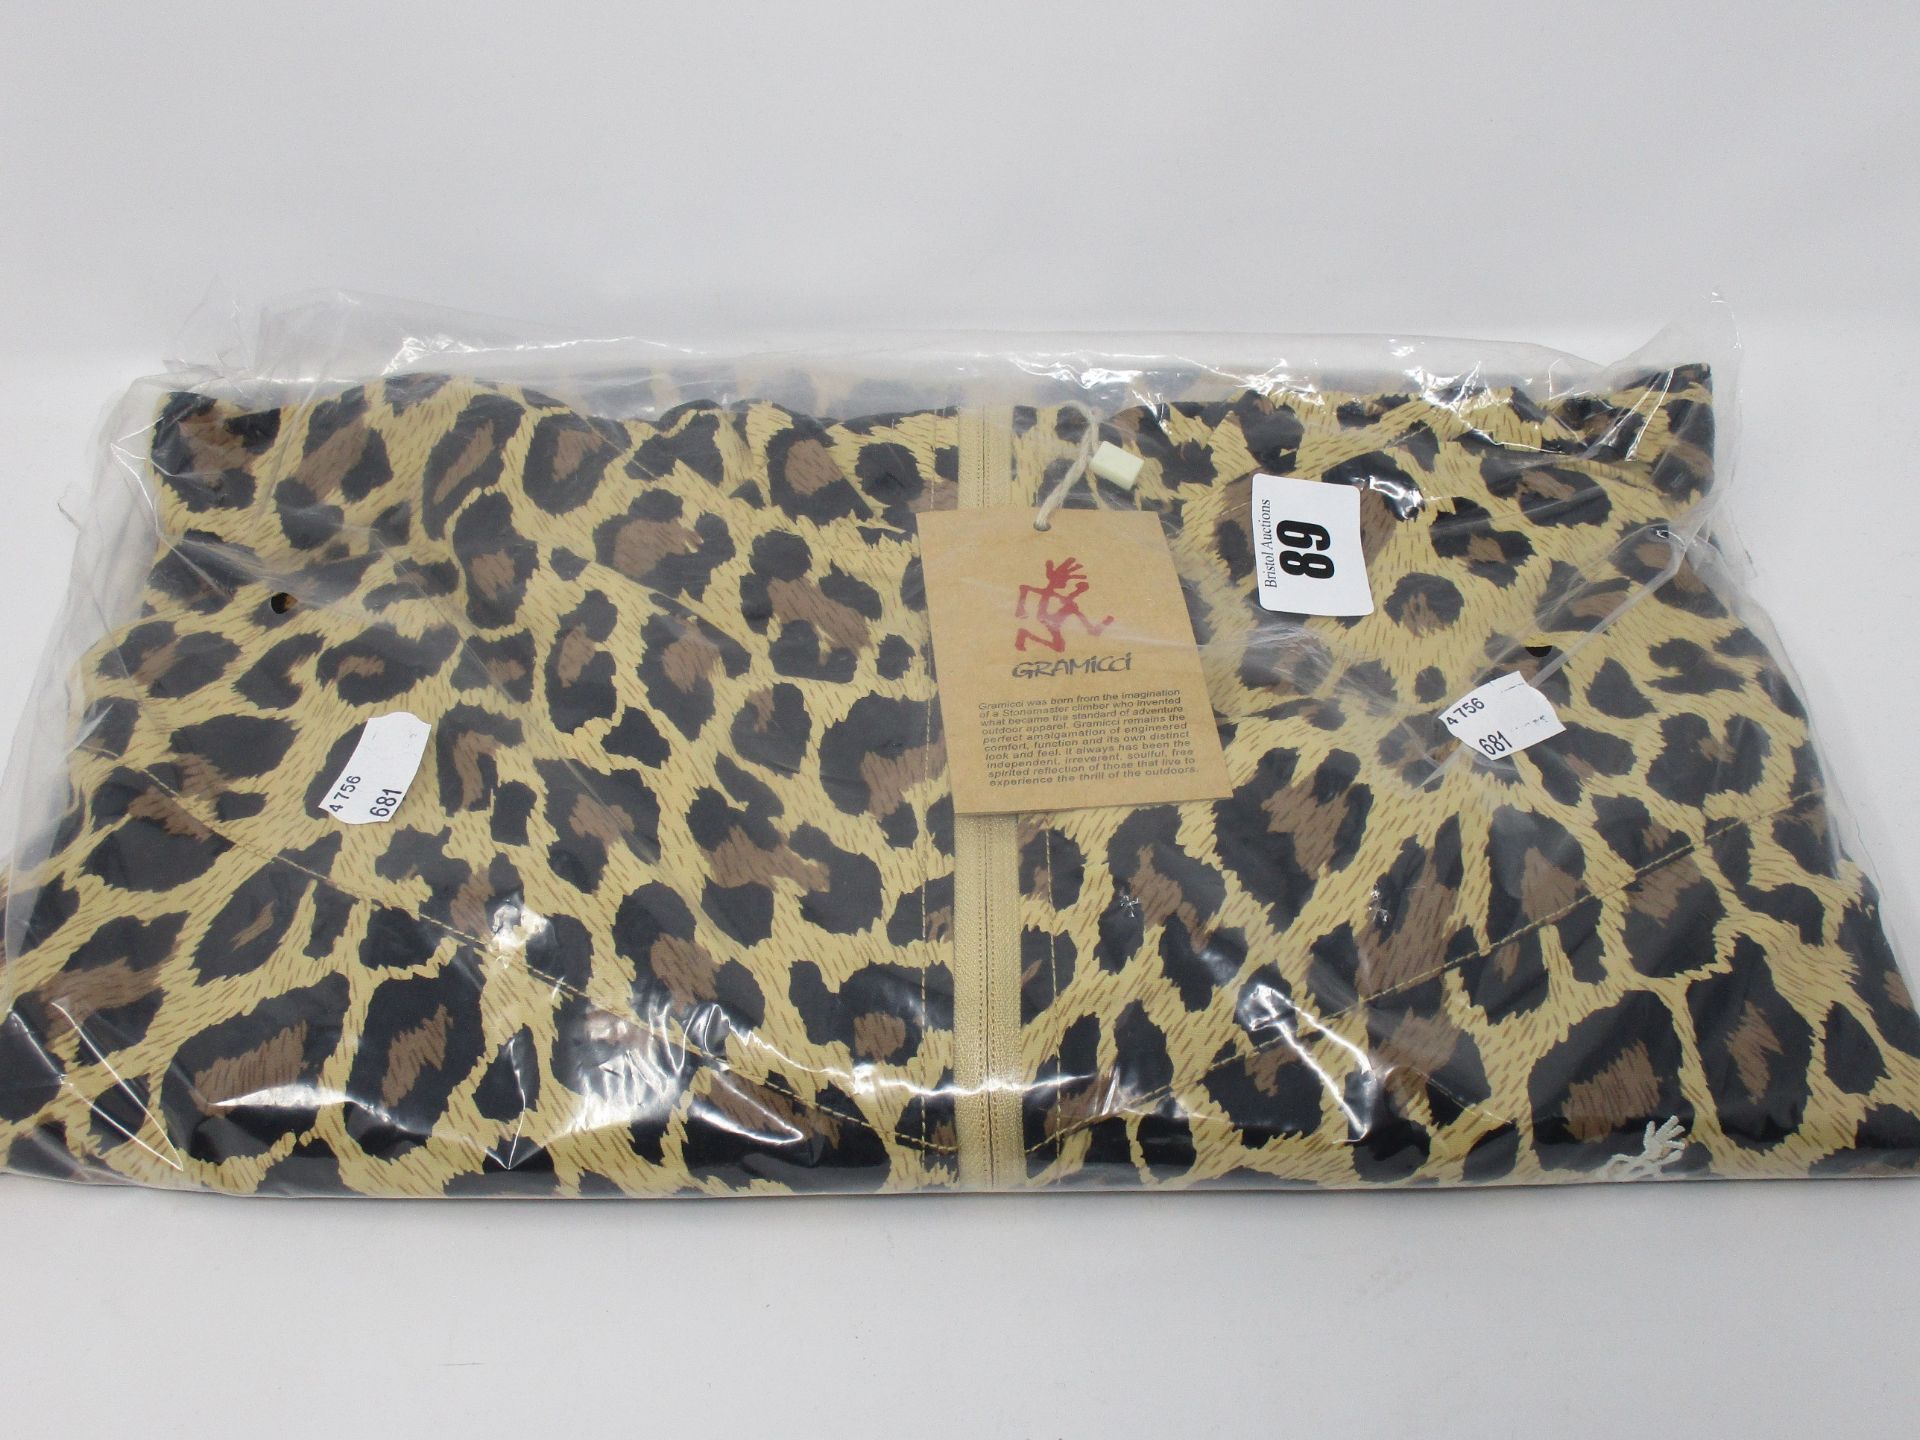 One as new Gramicci shell leopard jacket size XL.